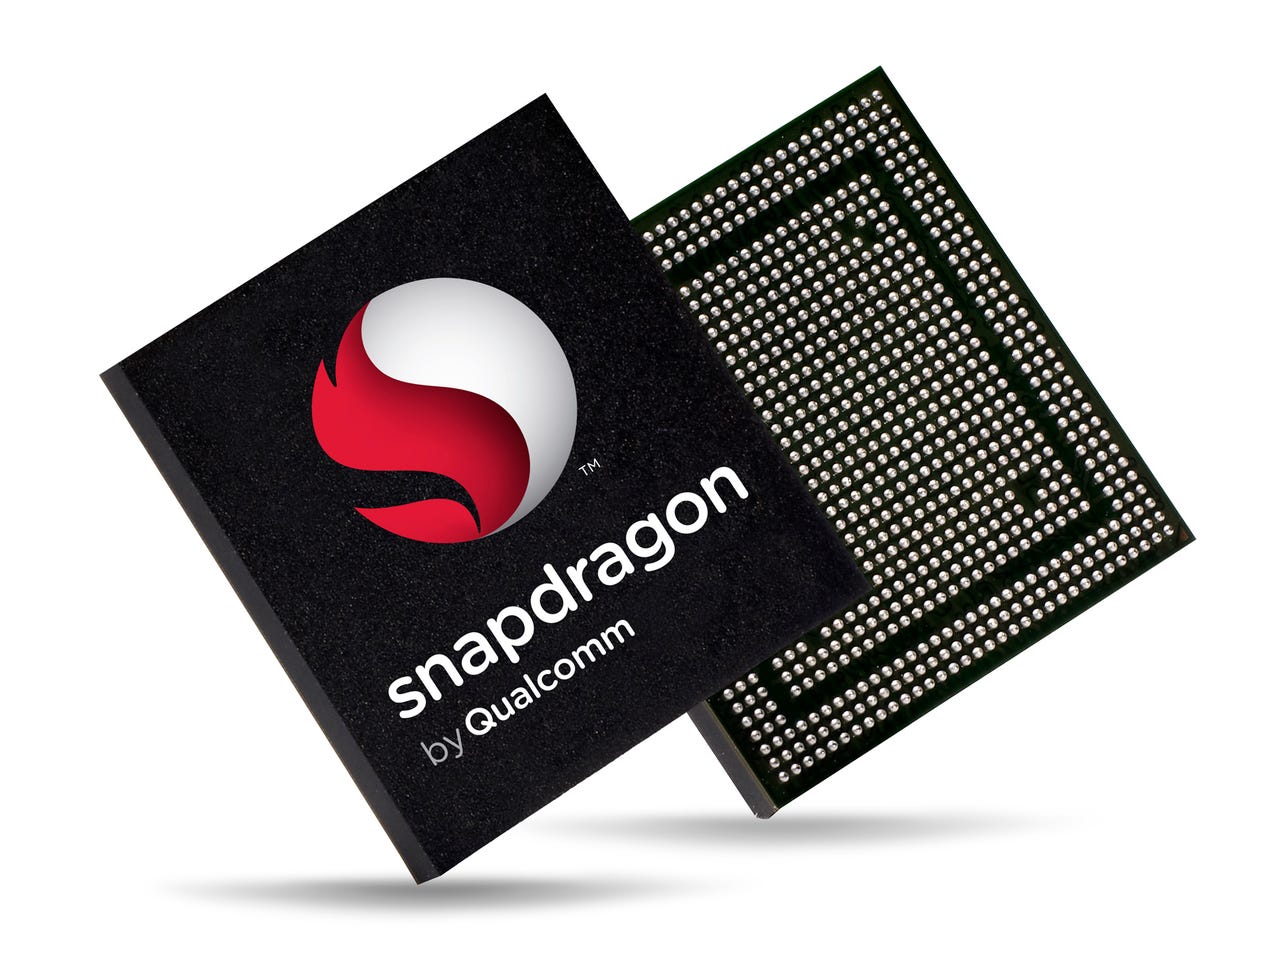 snapdragon-chip-with-logo.jpg